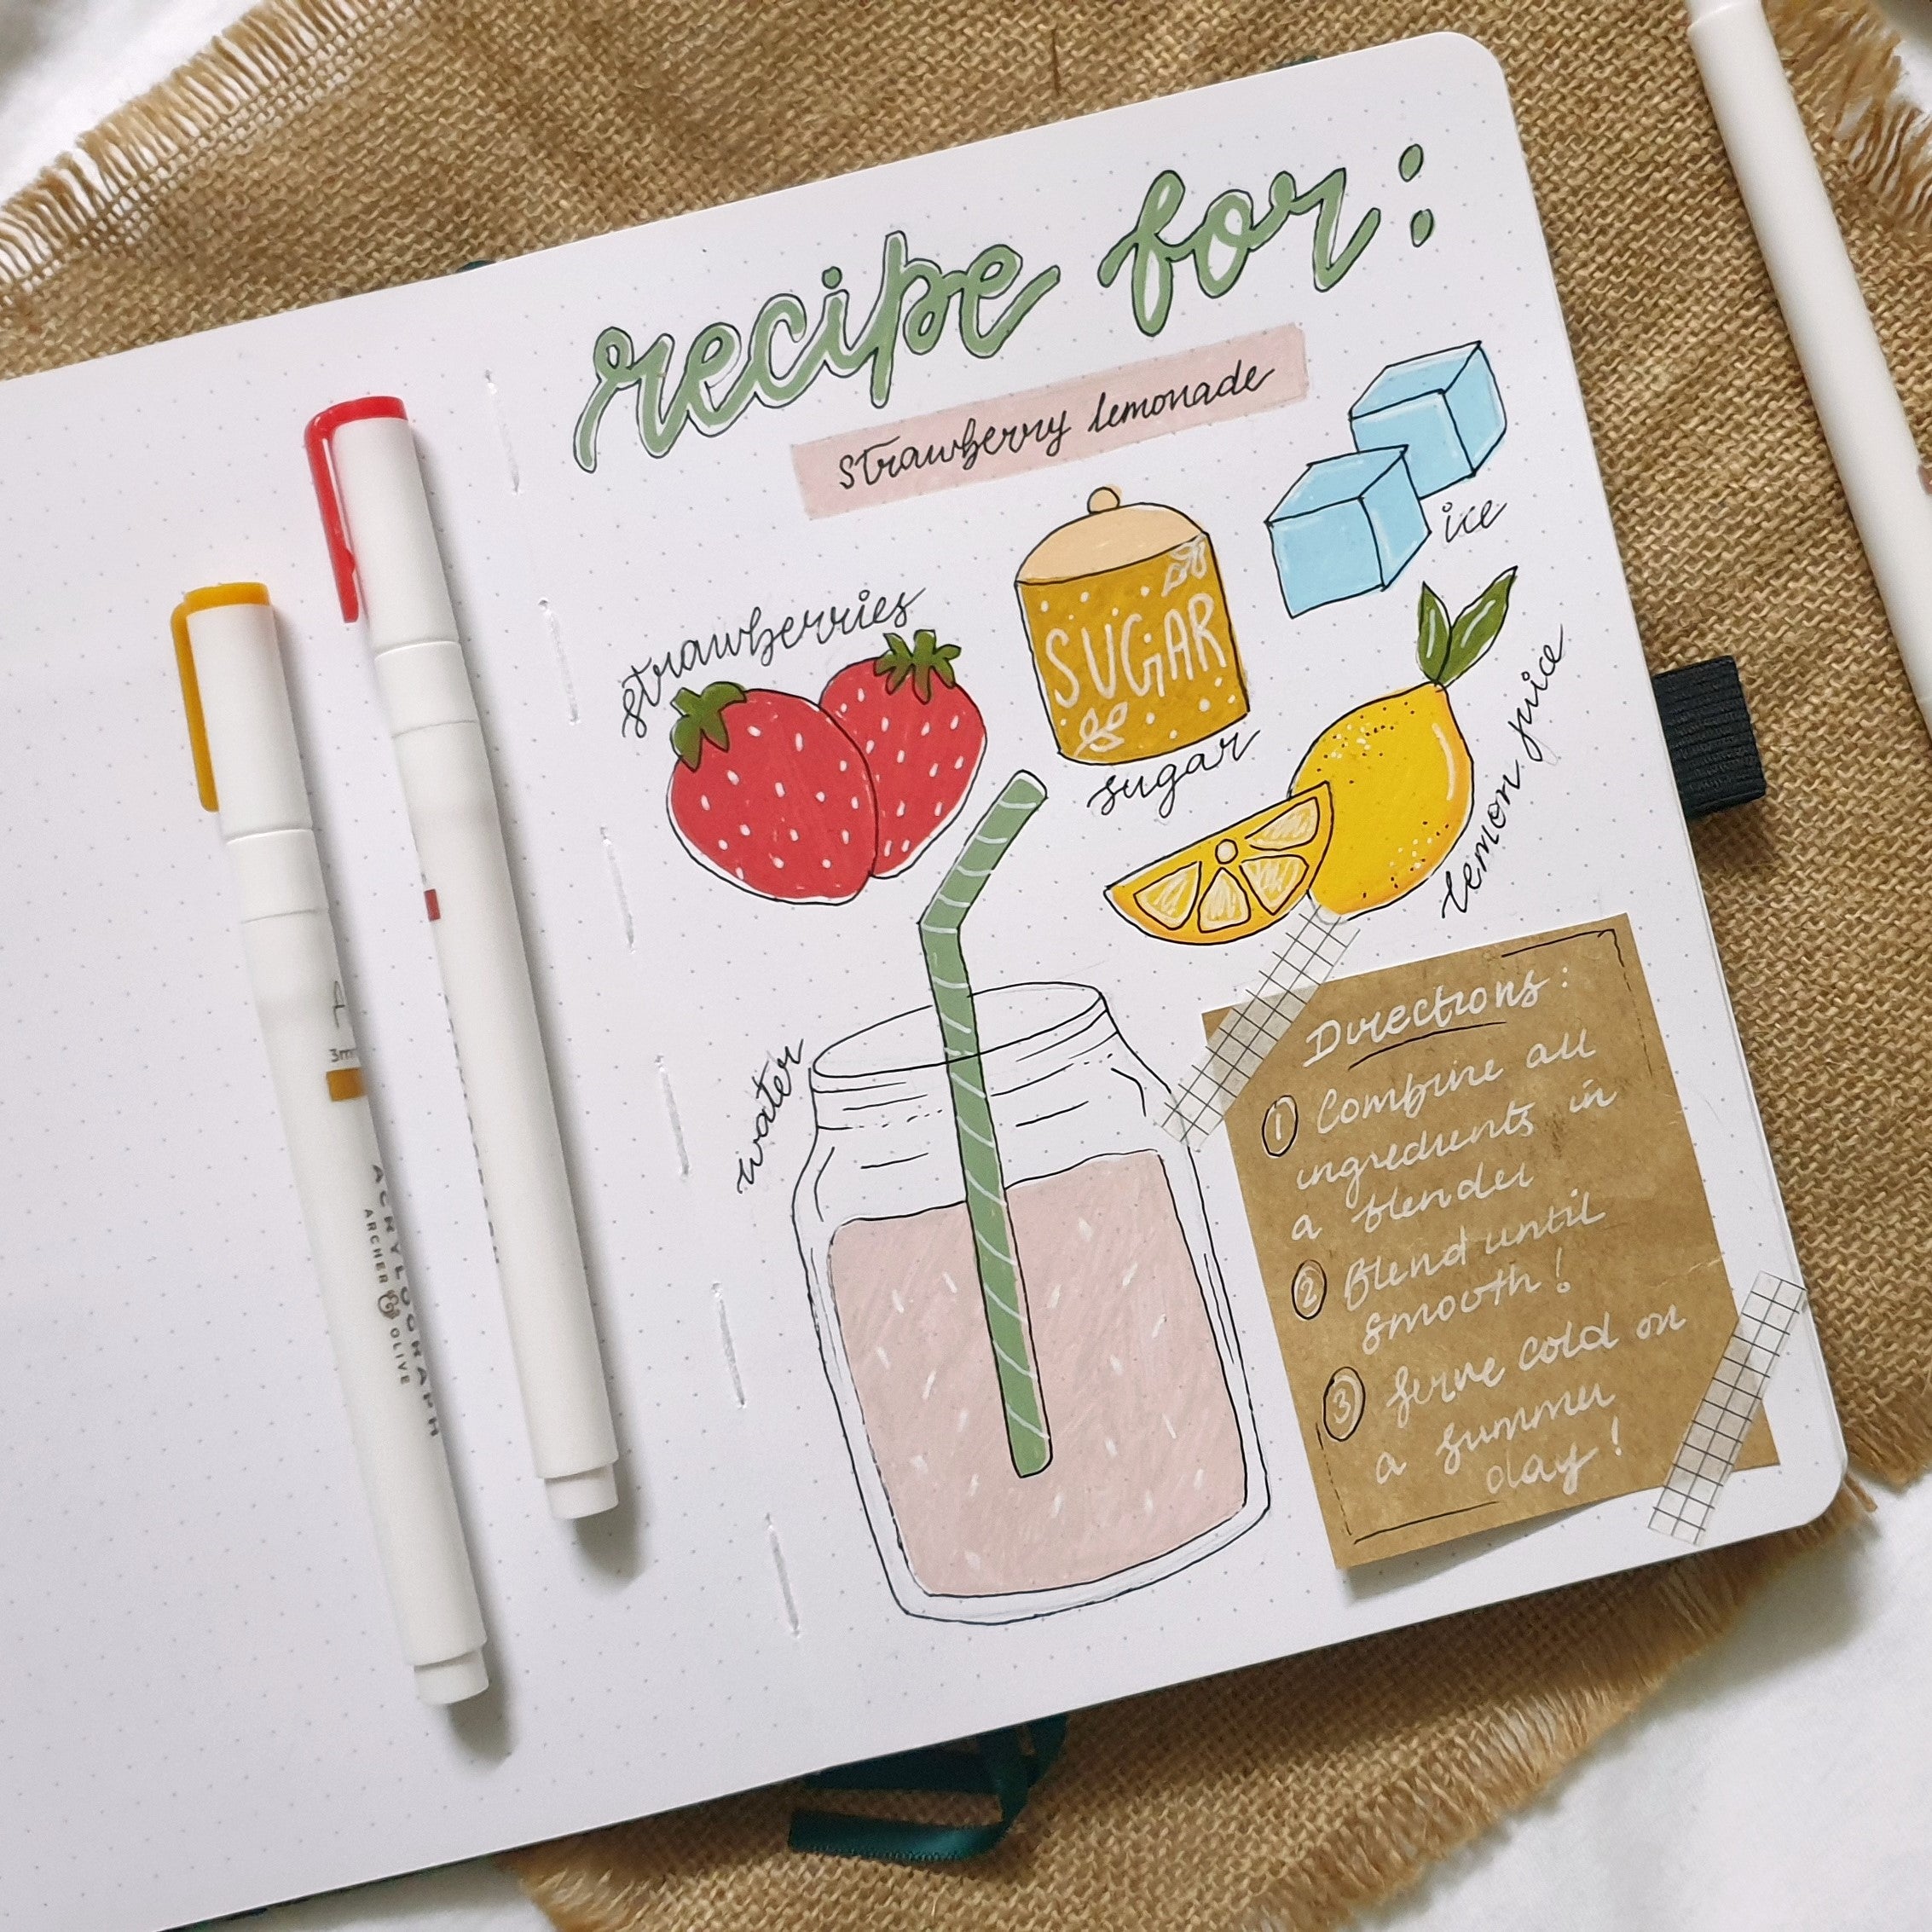 How to Use a Bullet Journal (Tips & Tricks) - DIY Candy